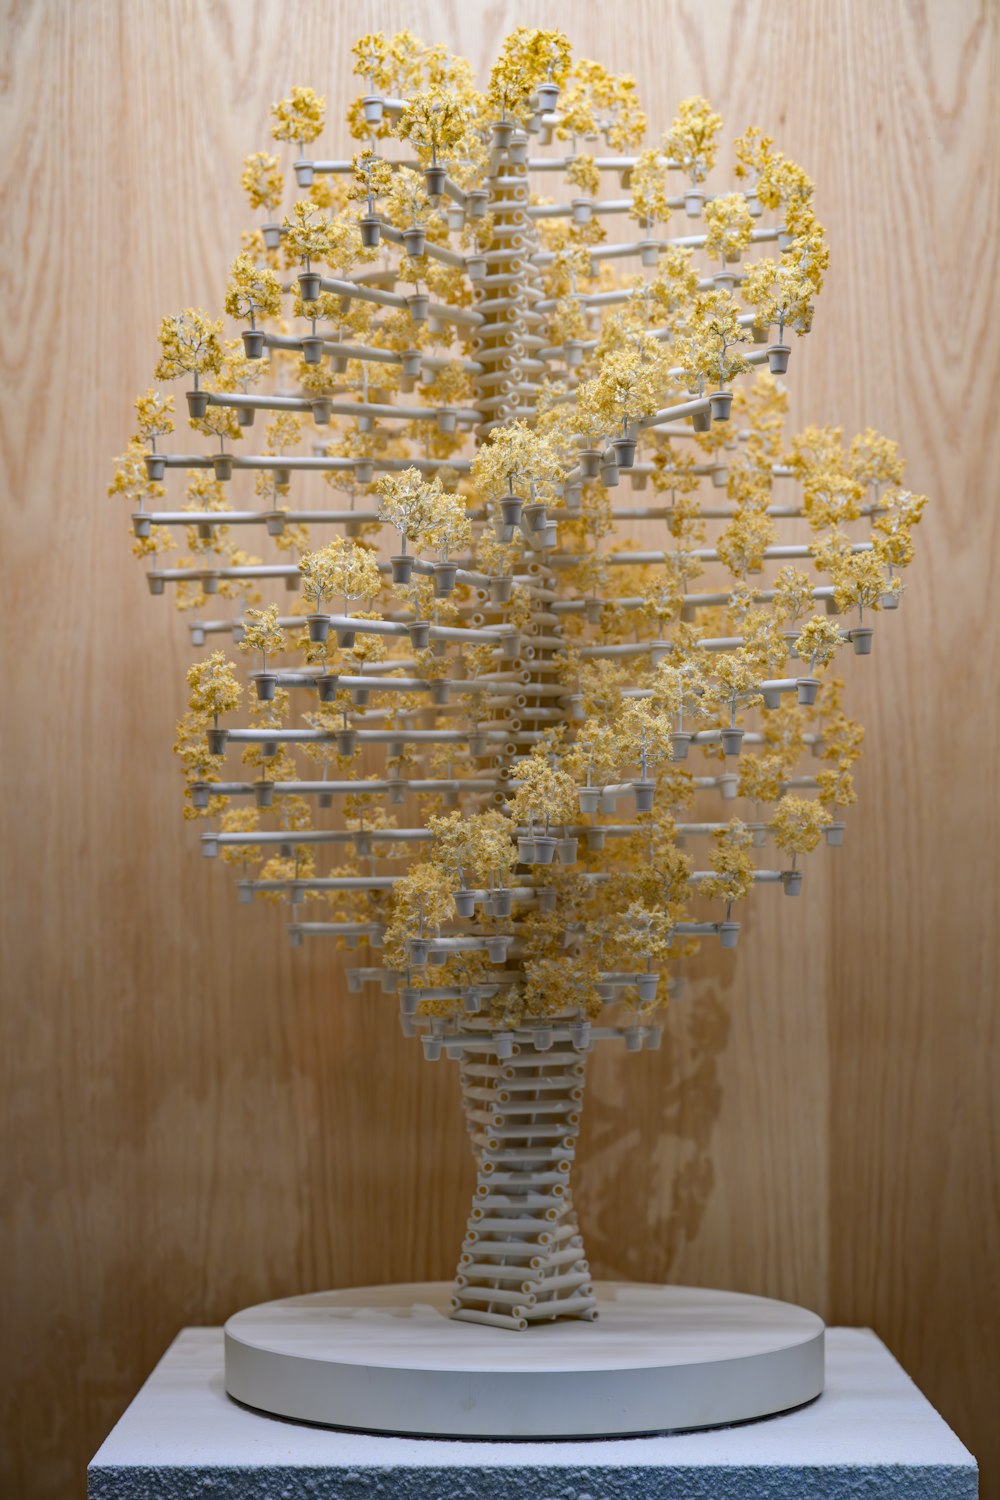 a sculpture of yellow flowers on a white pedestal